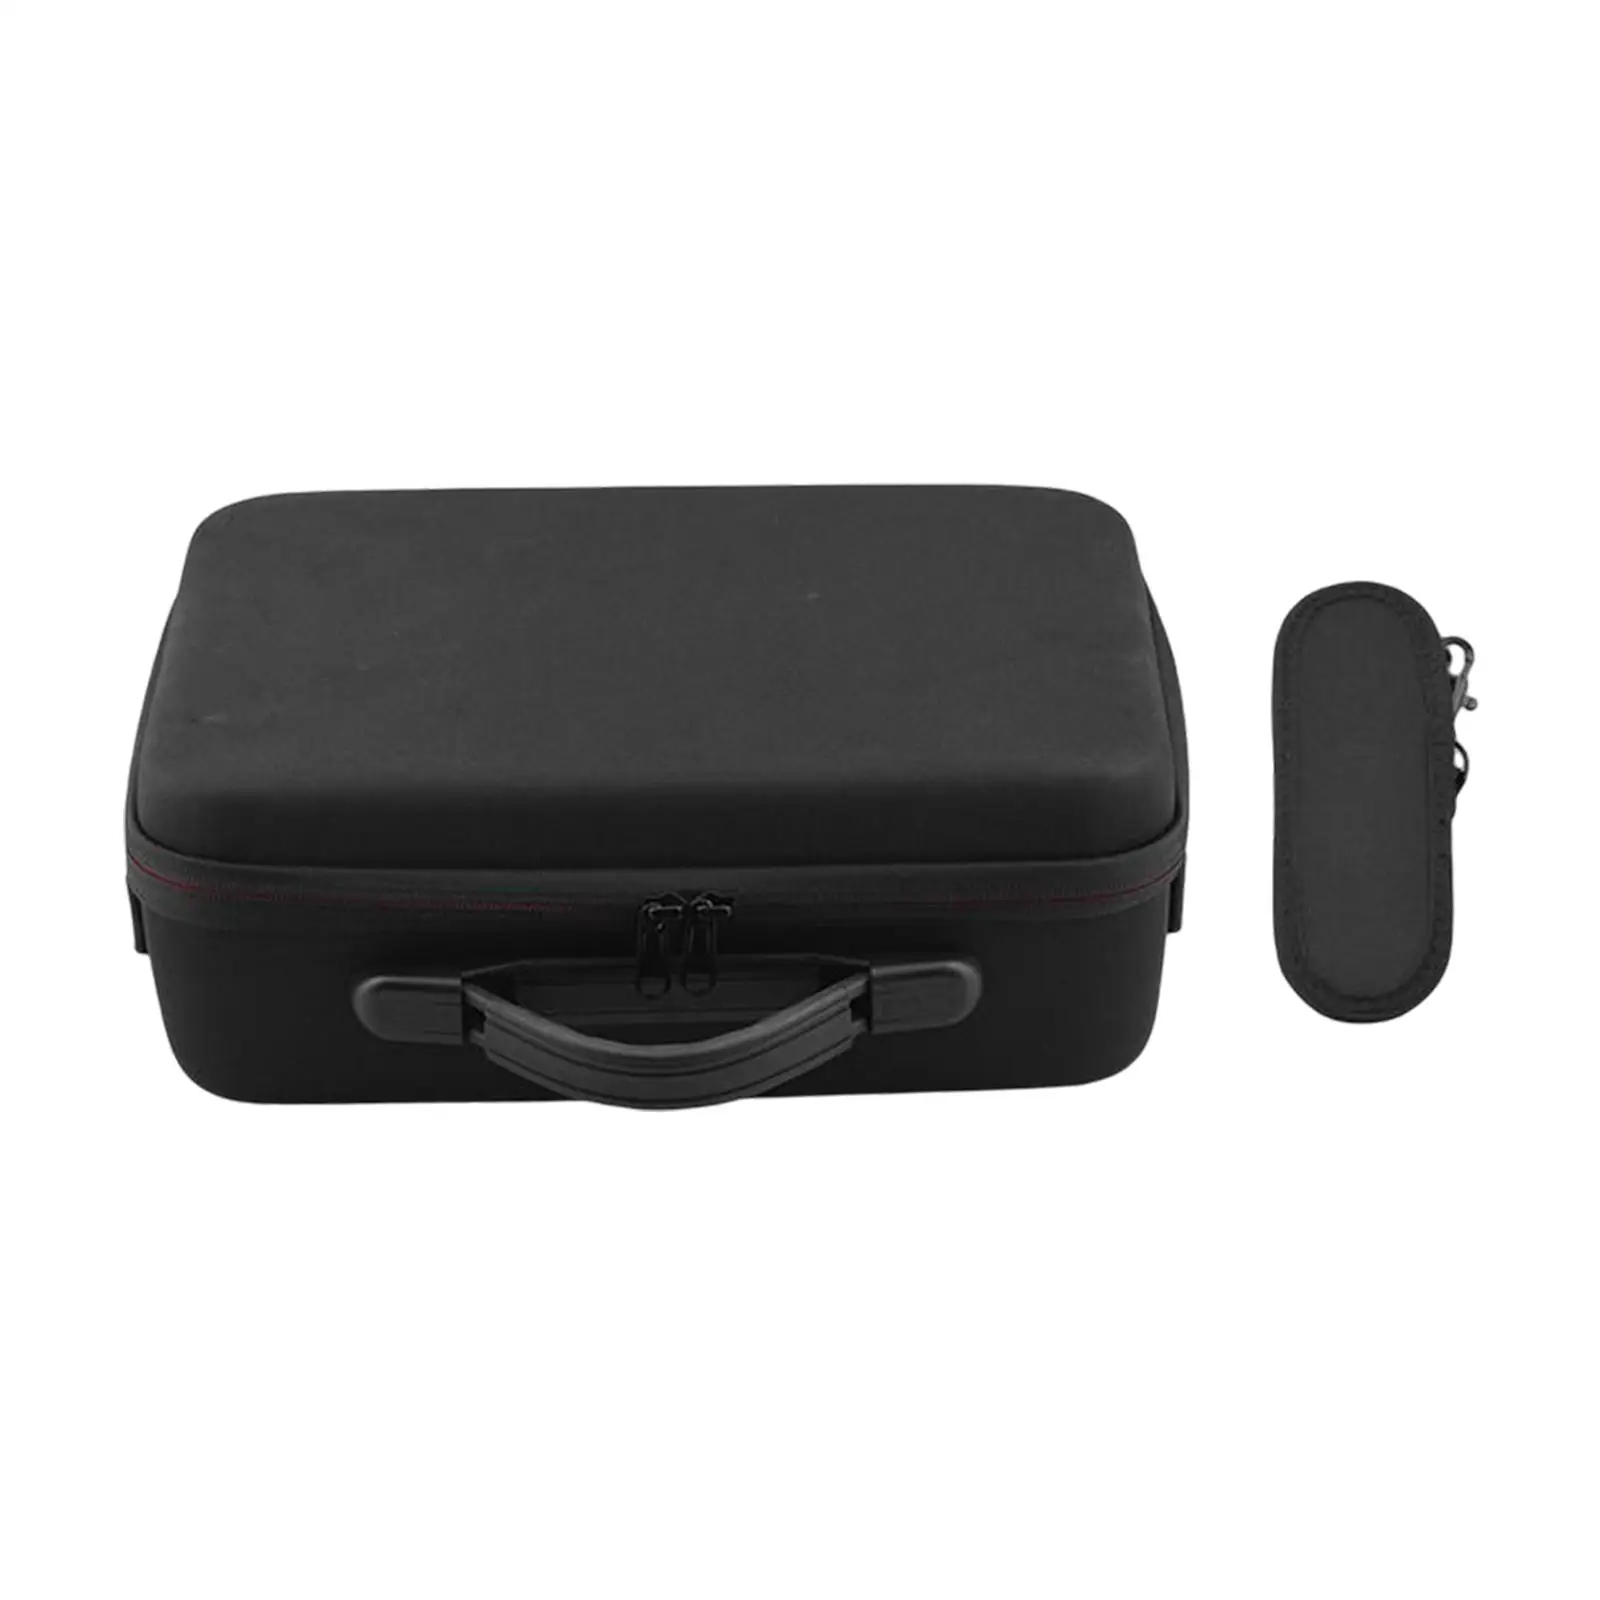 Travel Drone Carrying Travel Bag Drone Storage Case with Zipper Handbag Shoulder Bag Suitcase for Air Quadcopter Parts